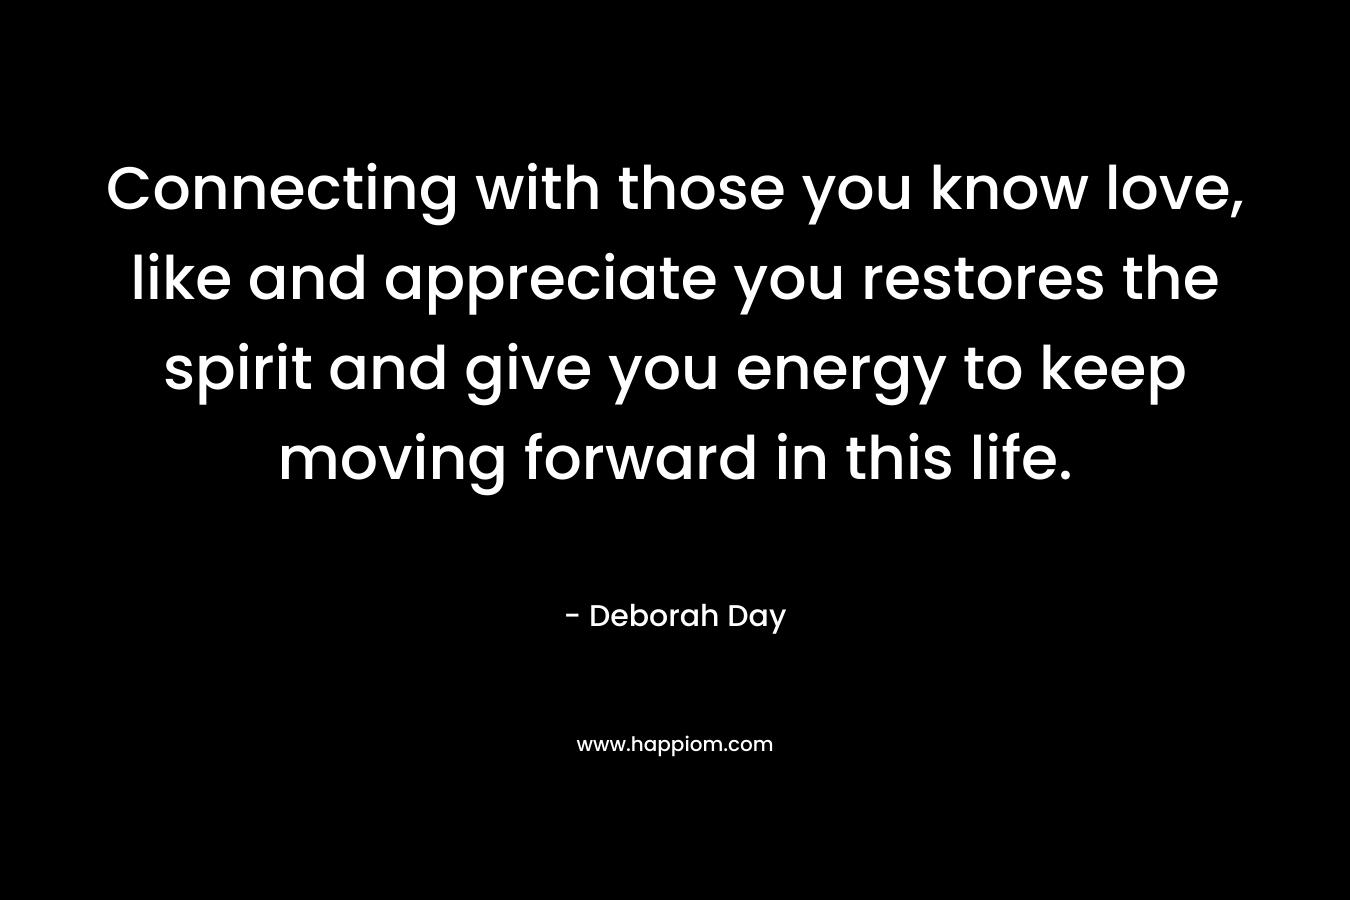 Connecting with those you know love, like and appreciate you restores the spirit and give you energy to keep moving forward in this life.